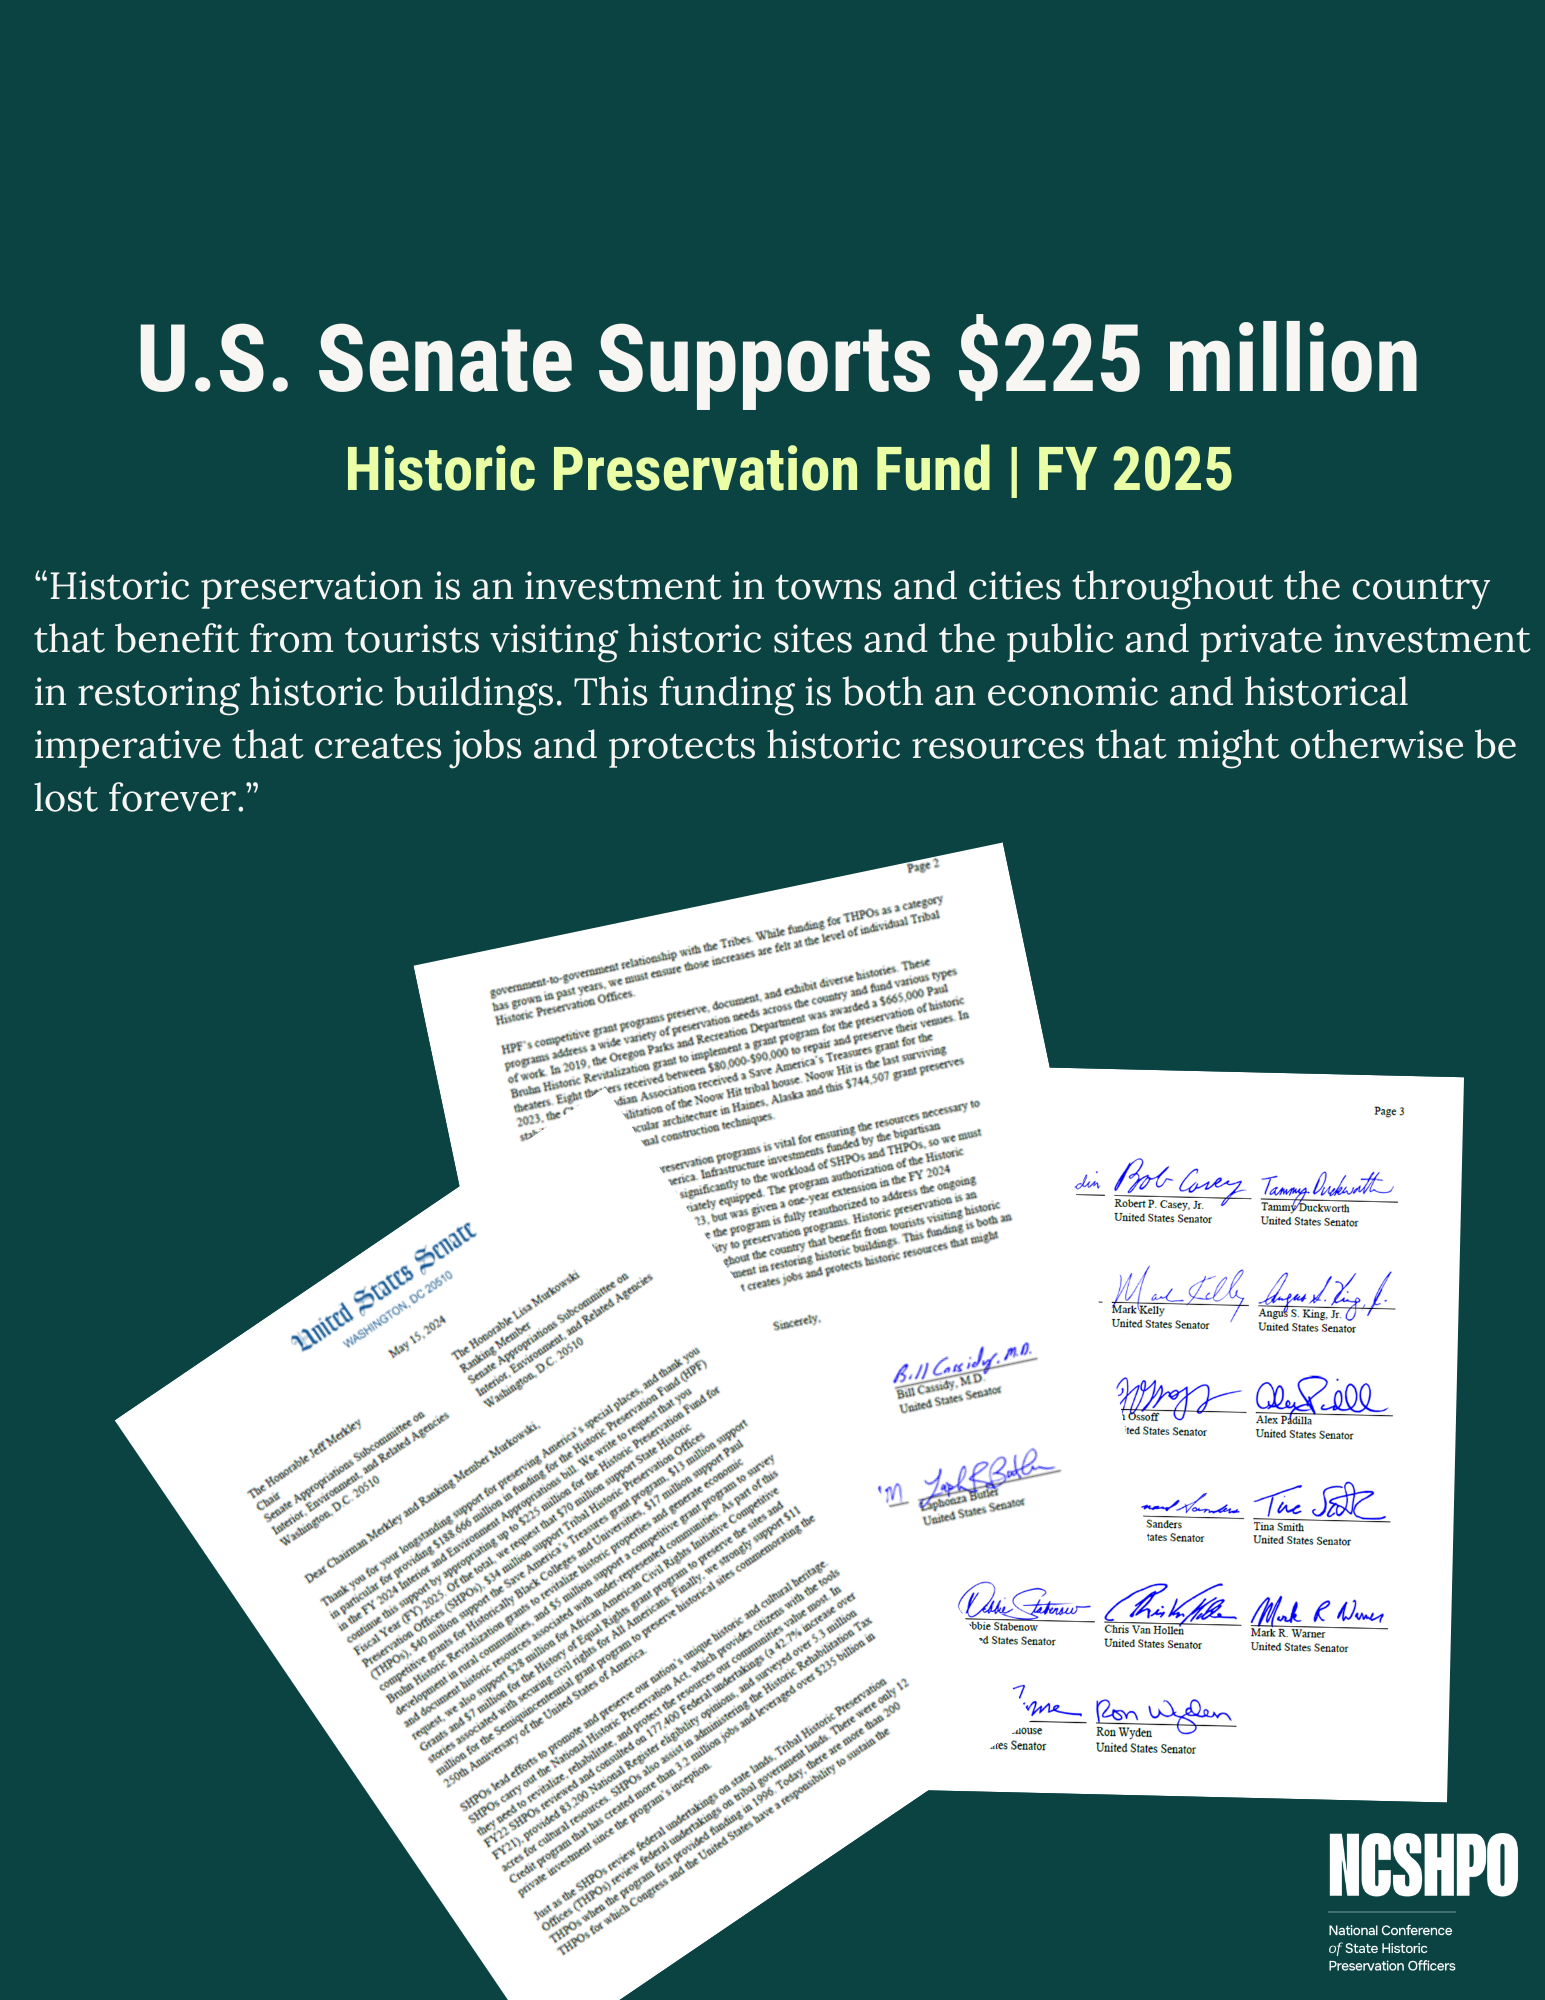 Congress Supports $225 million for the HPF for FY 2025